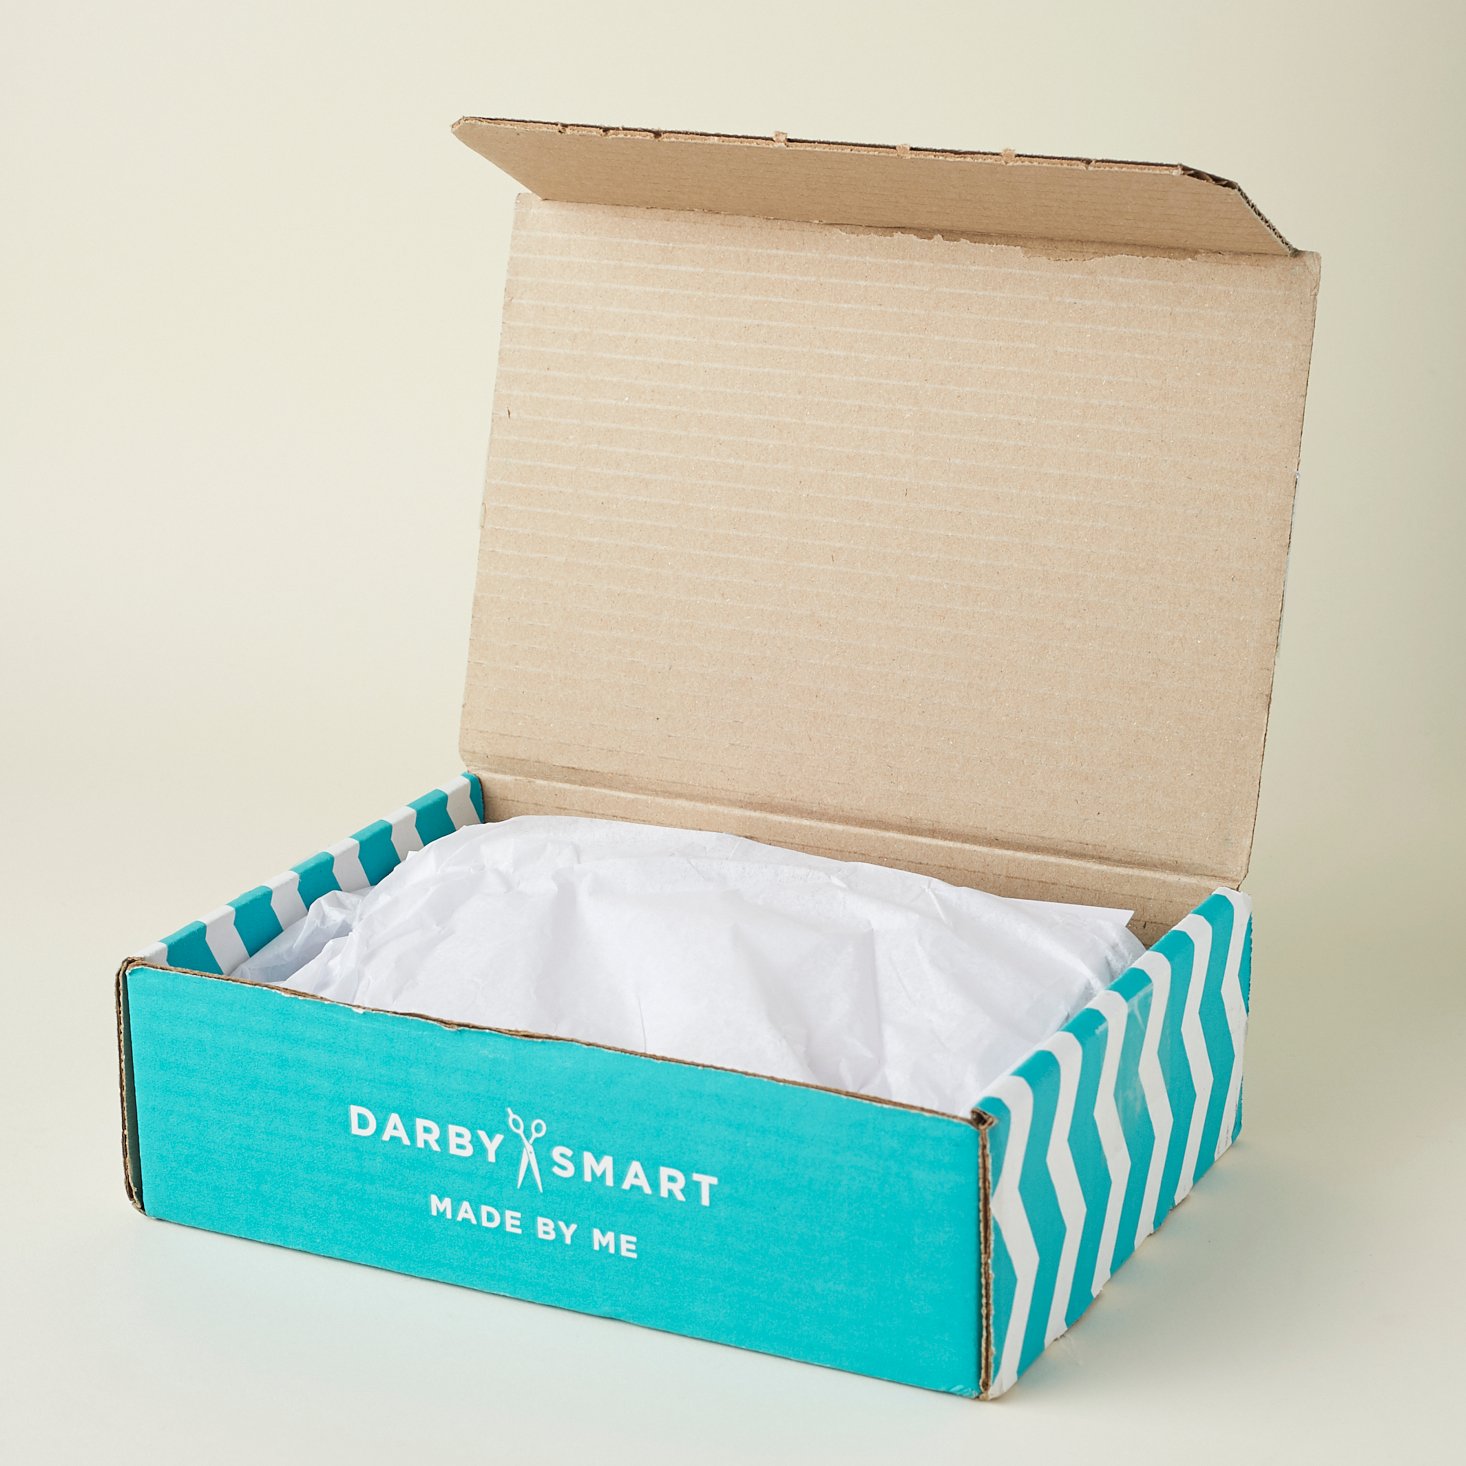 Darby Smart Subscription Box Review + Coupon – January 2017